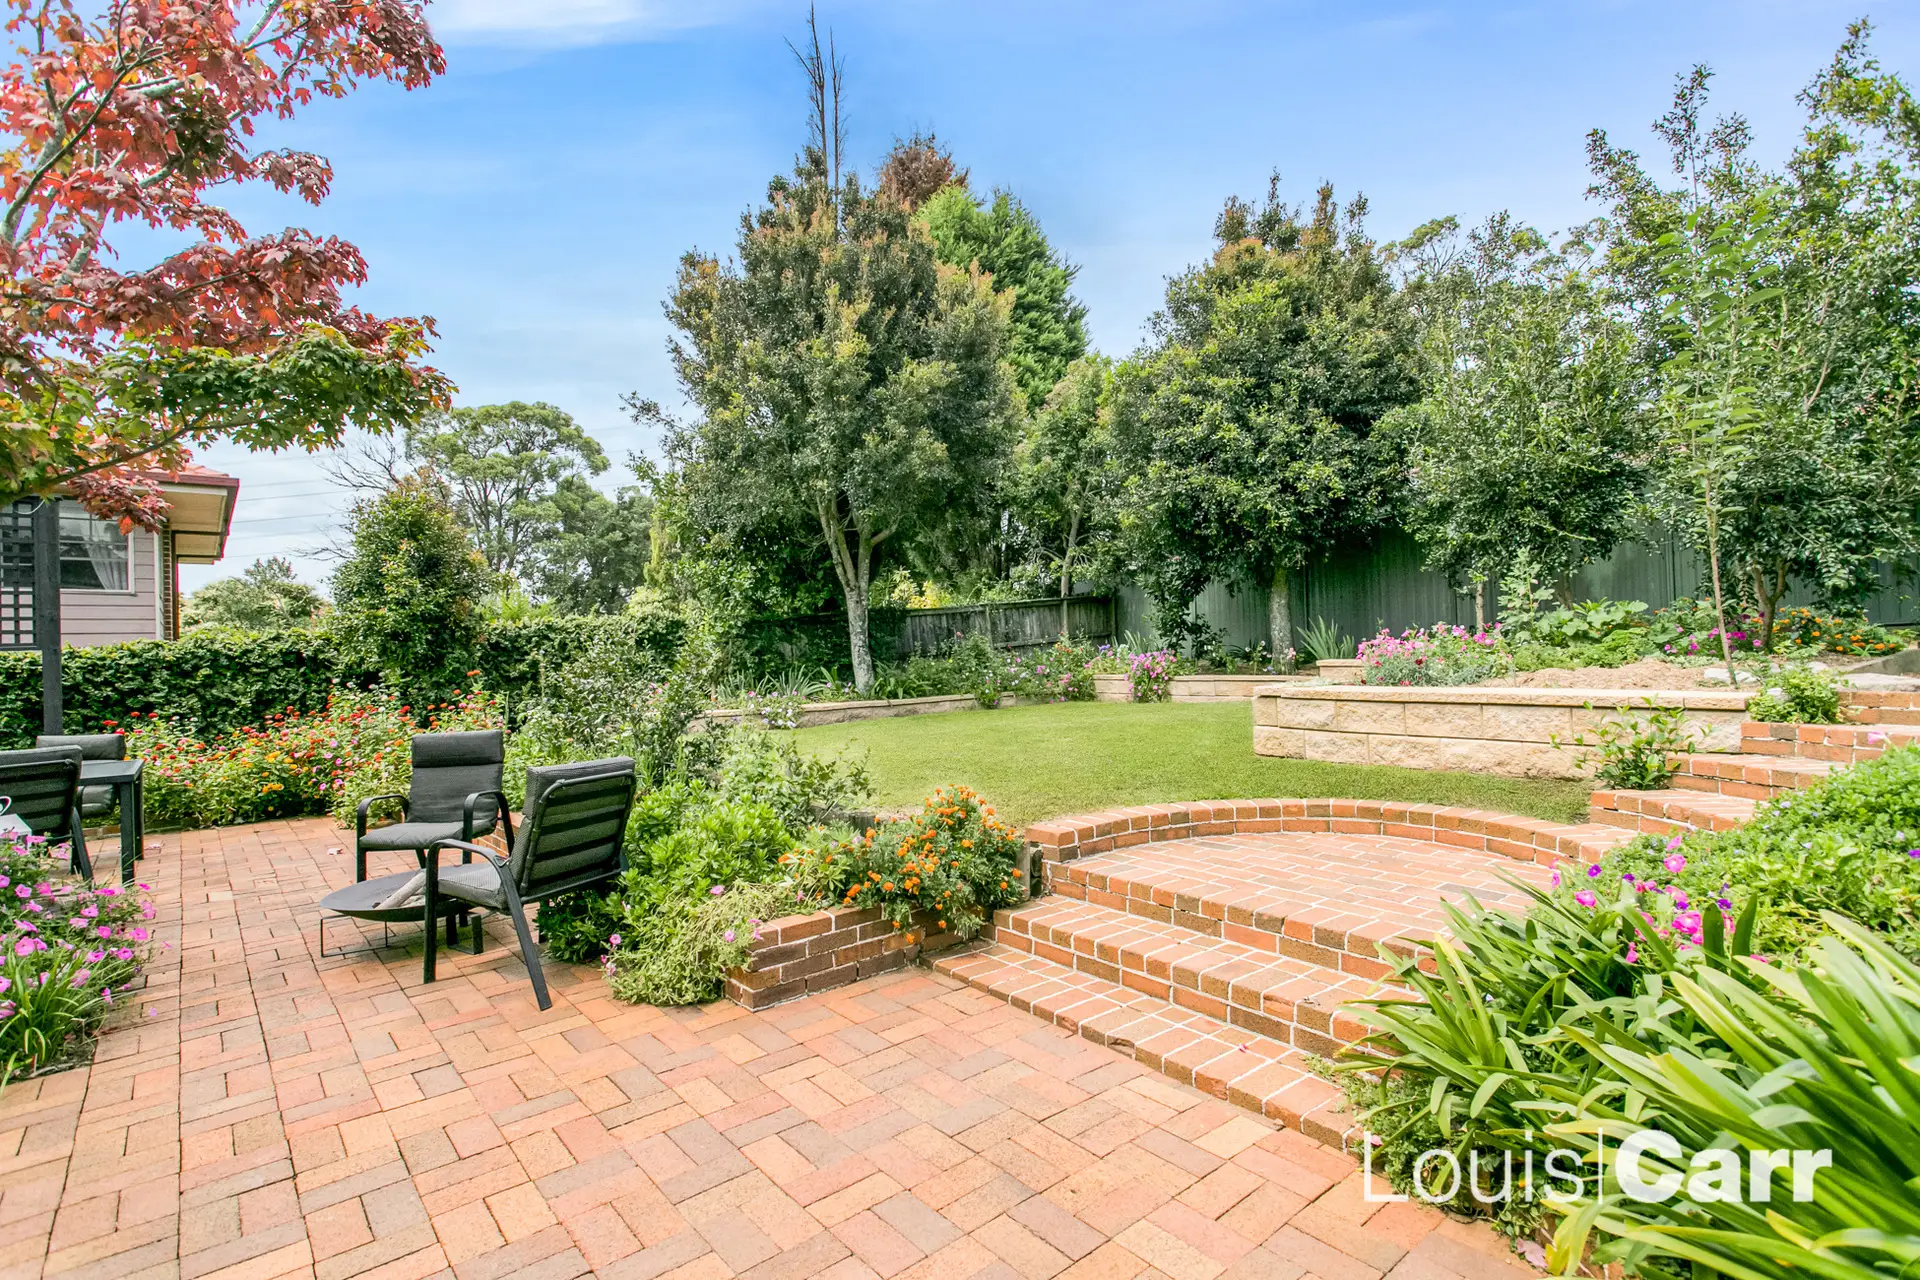 Photo #3: 9 Teddick Place, Cherrybrook - Sold by Louis Carr Real Estate